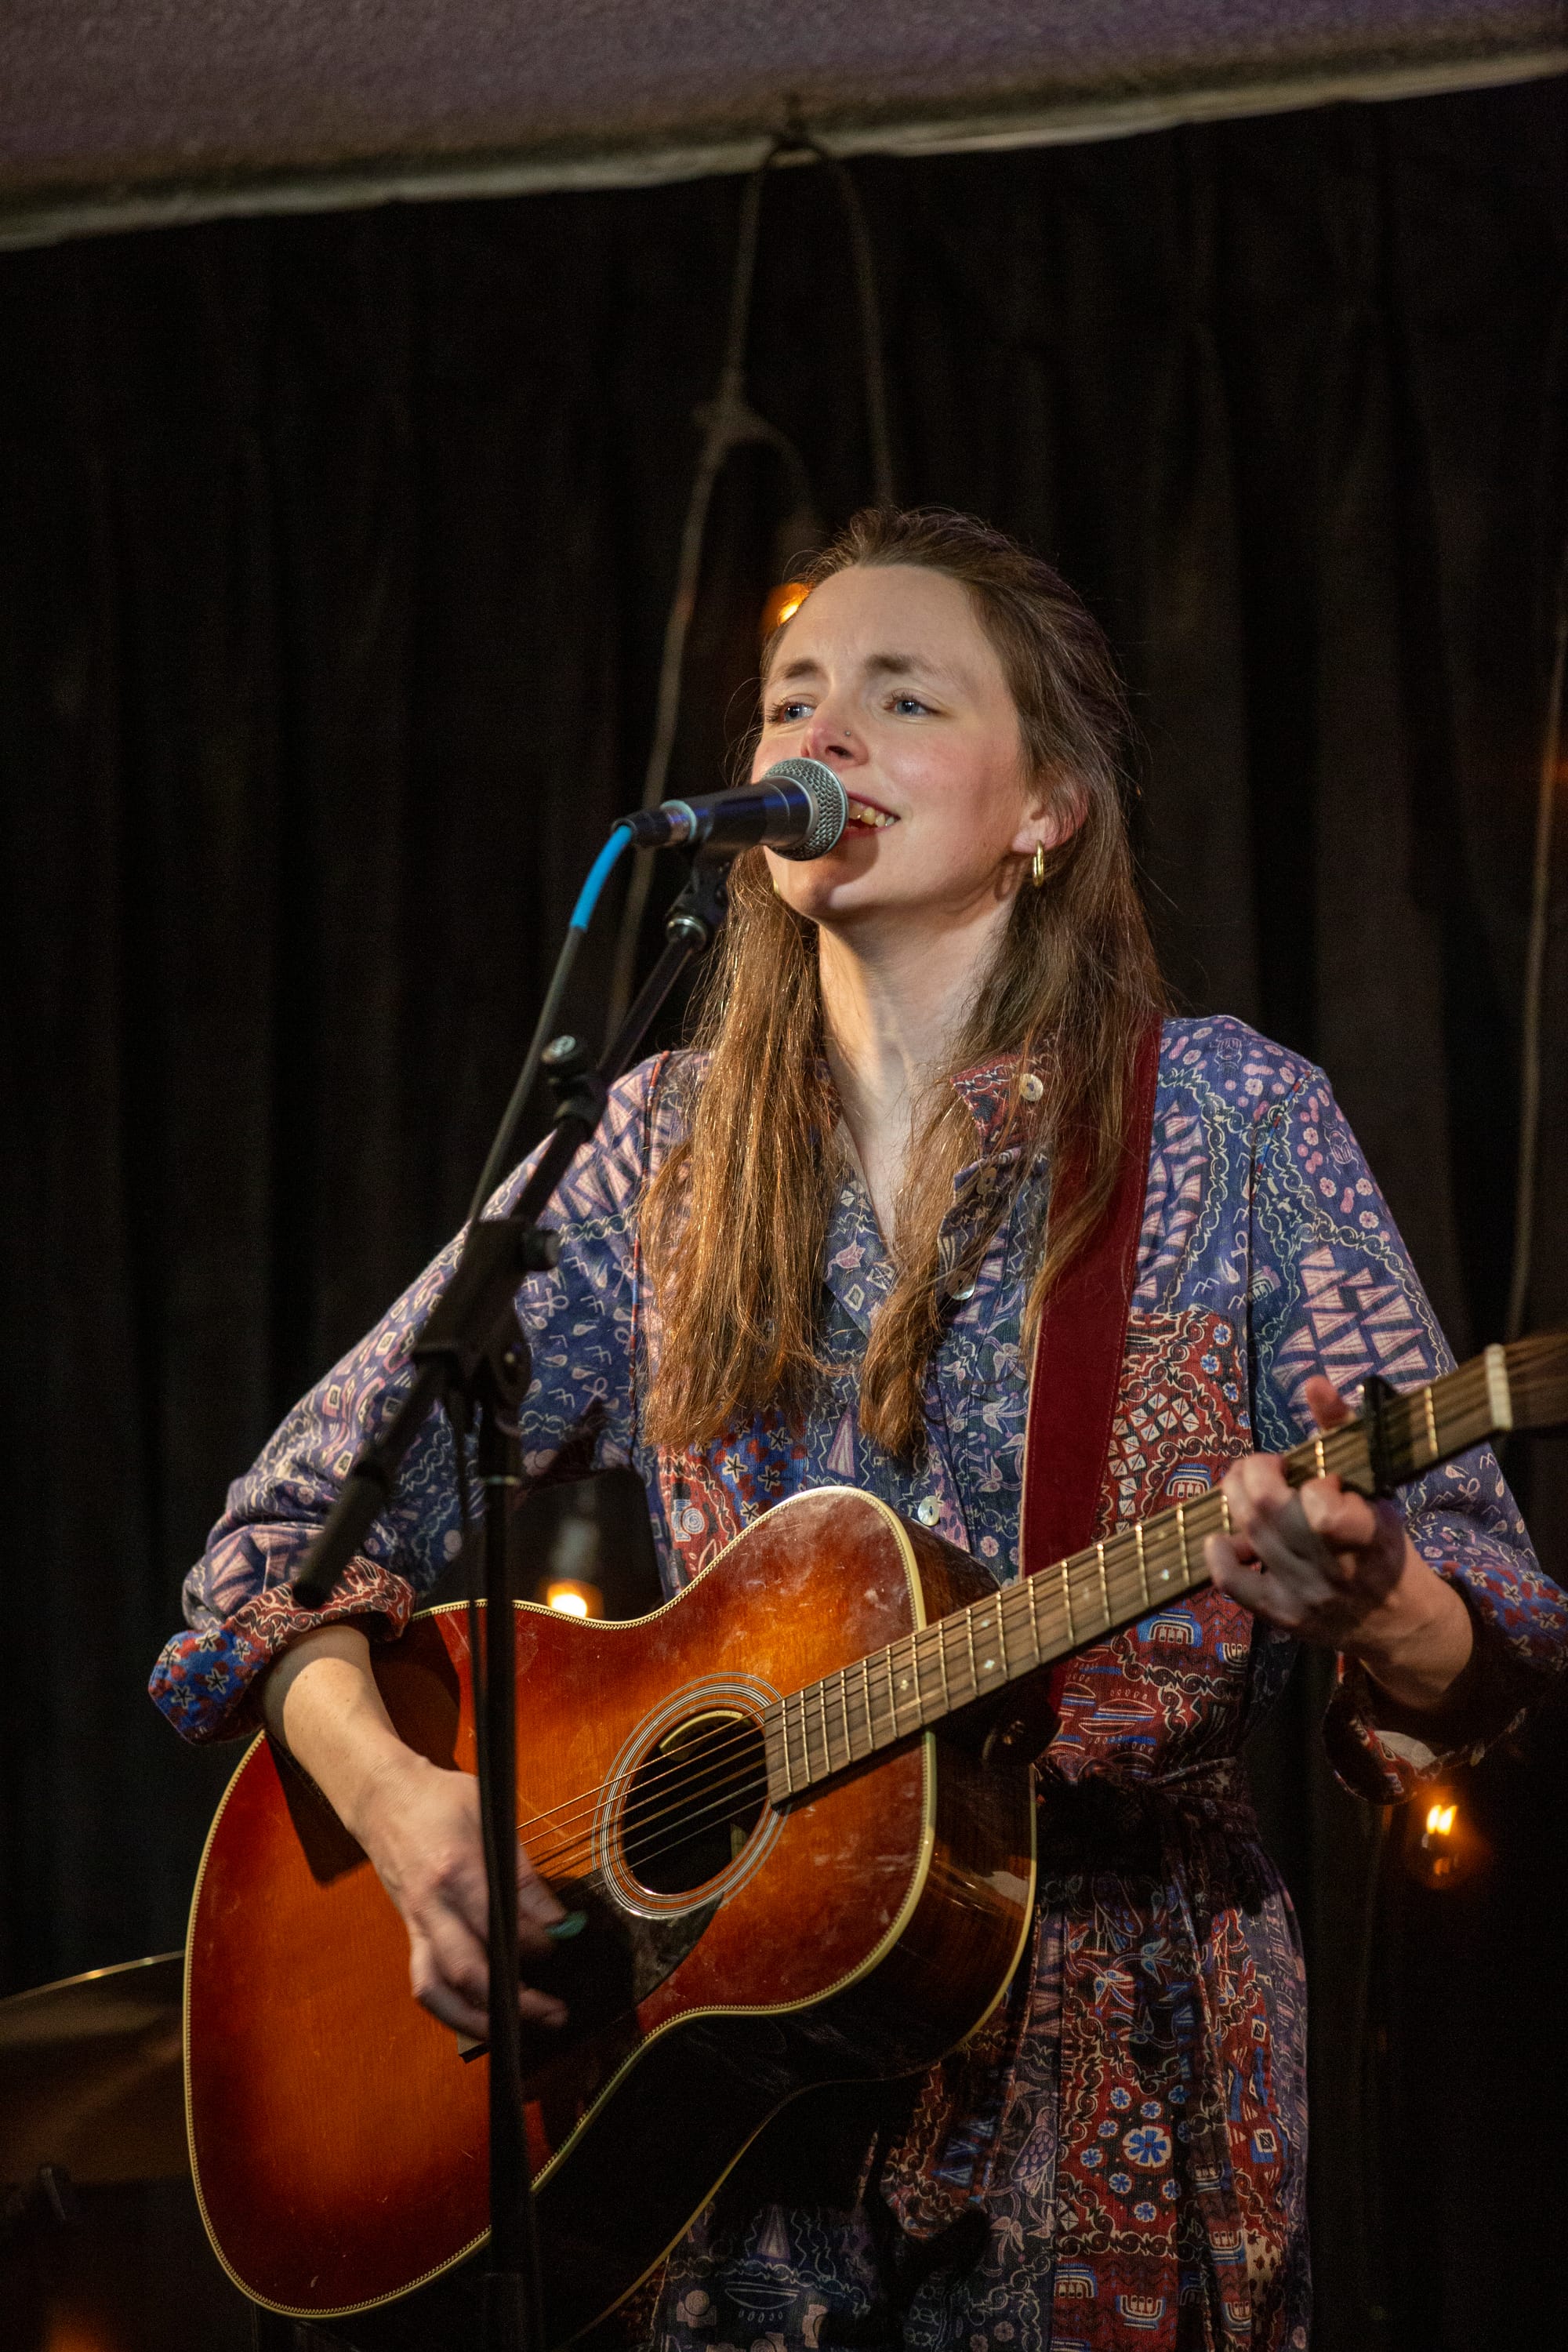 Conjuring Ethereal Magic: Lindsay Foote's Captivating Performance at Club Passim